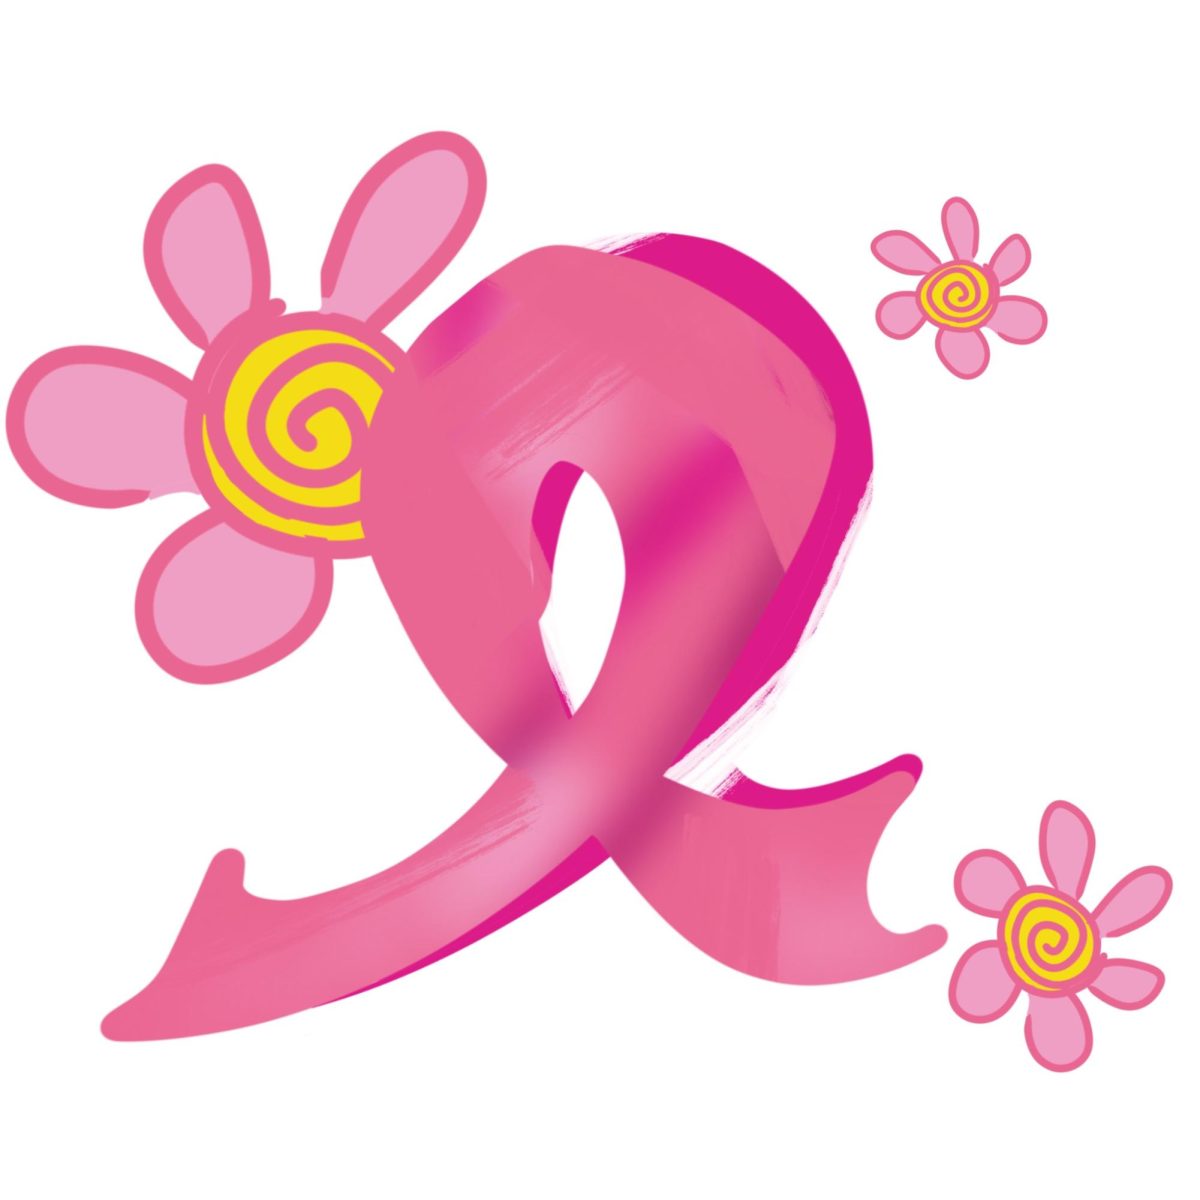 OUR VIEW: Spread breast cancer awareness this October